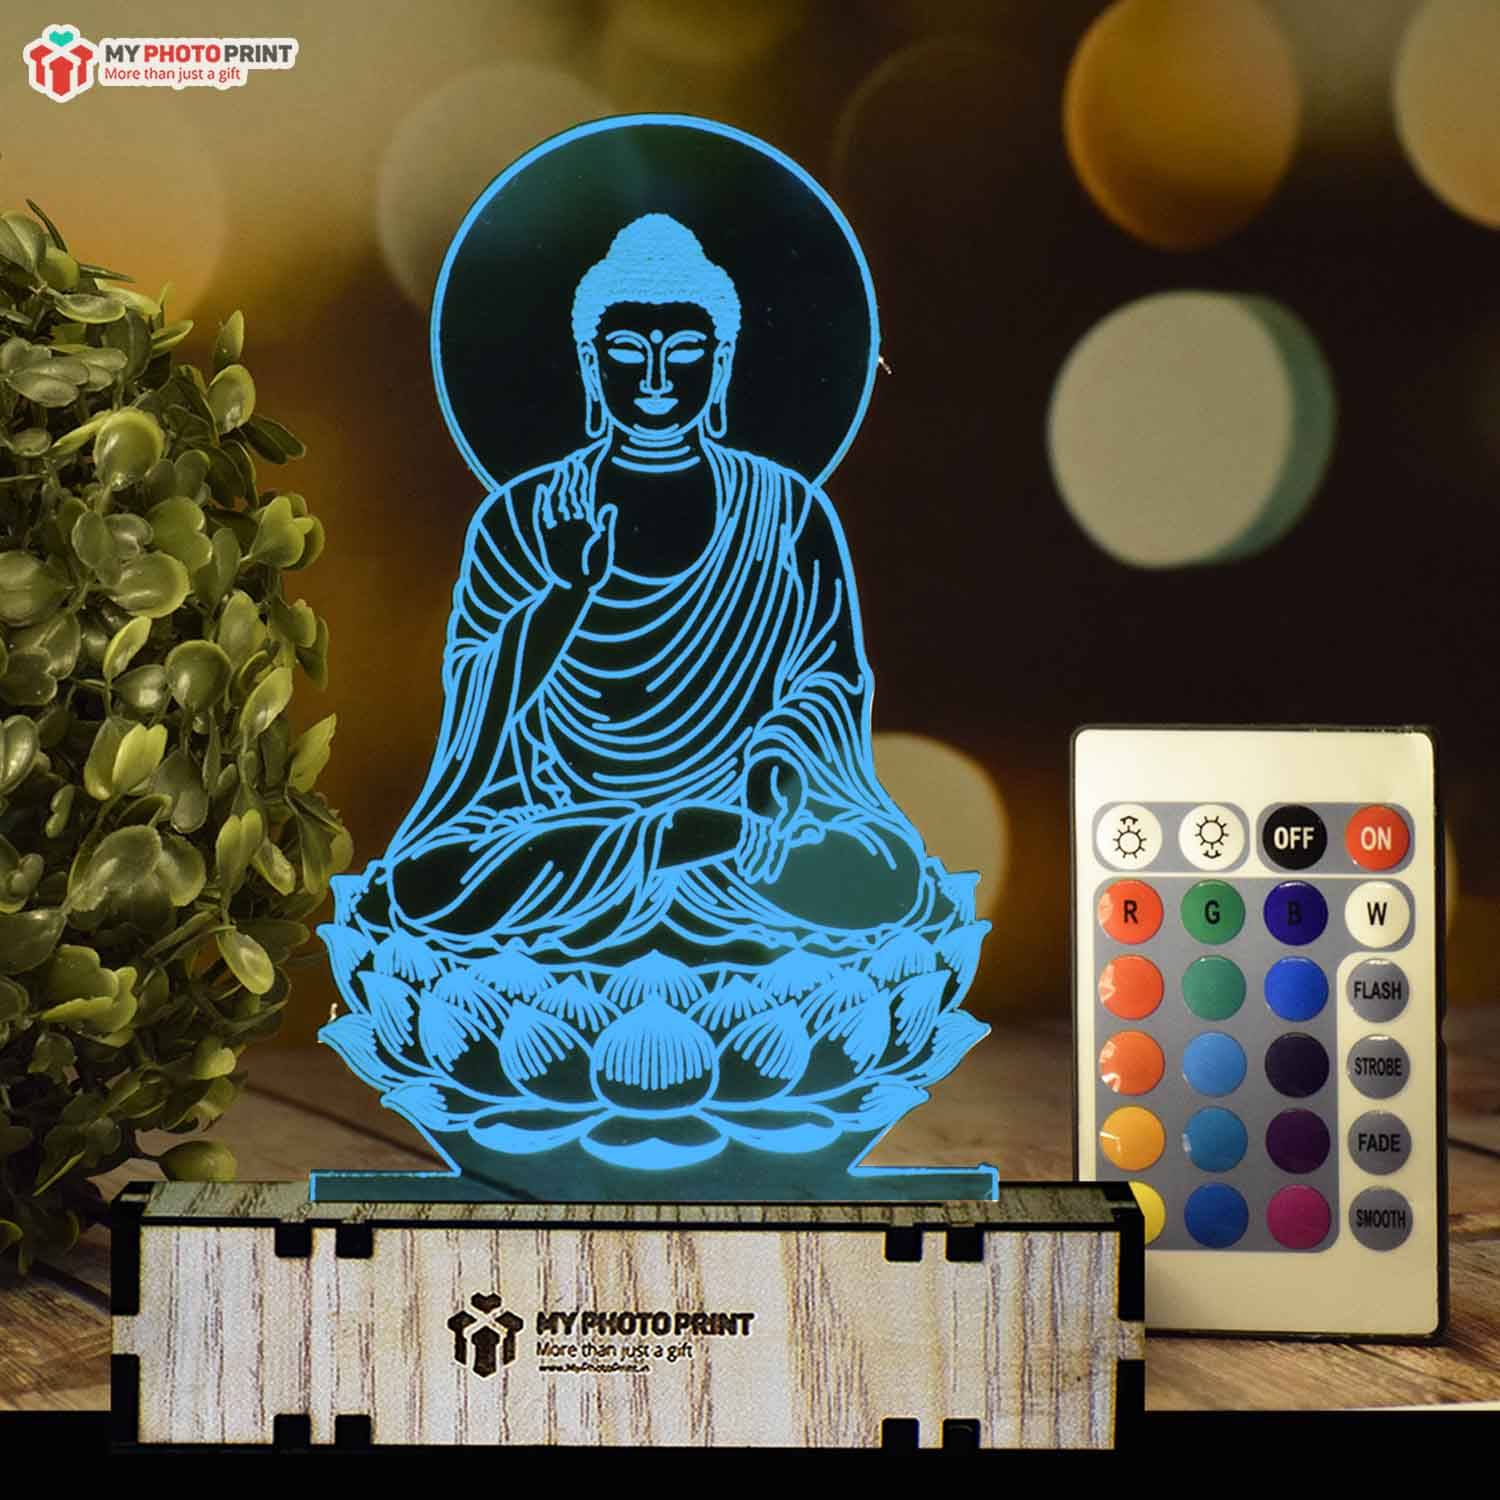 Peaceful Buddha Acrylic 3D illusion LED Lamp with Color Changing Led and Remote#1397